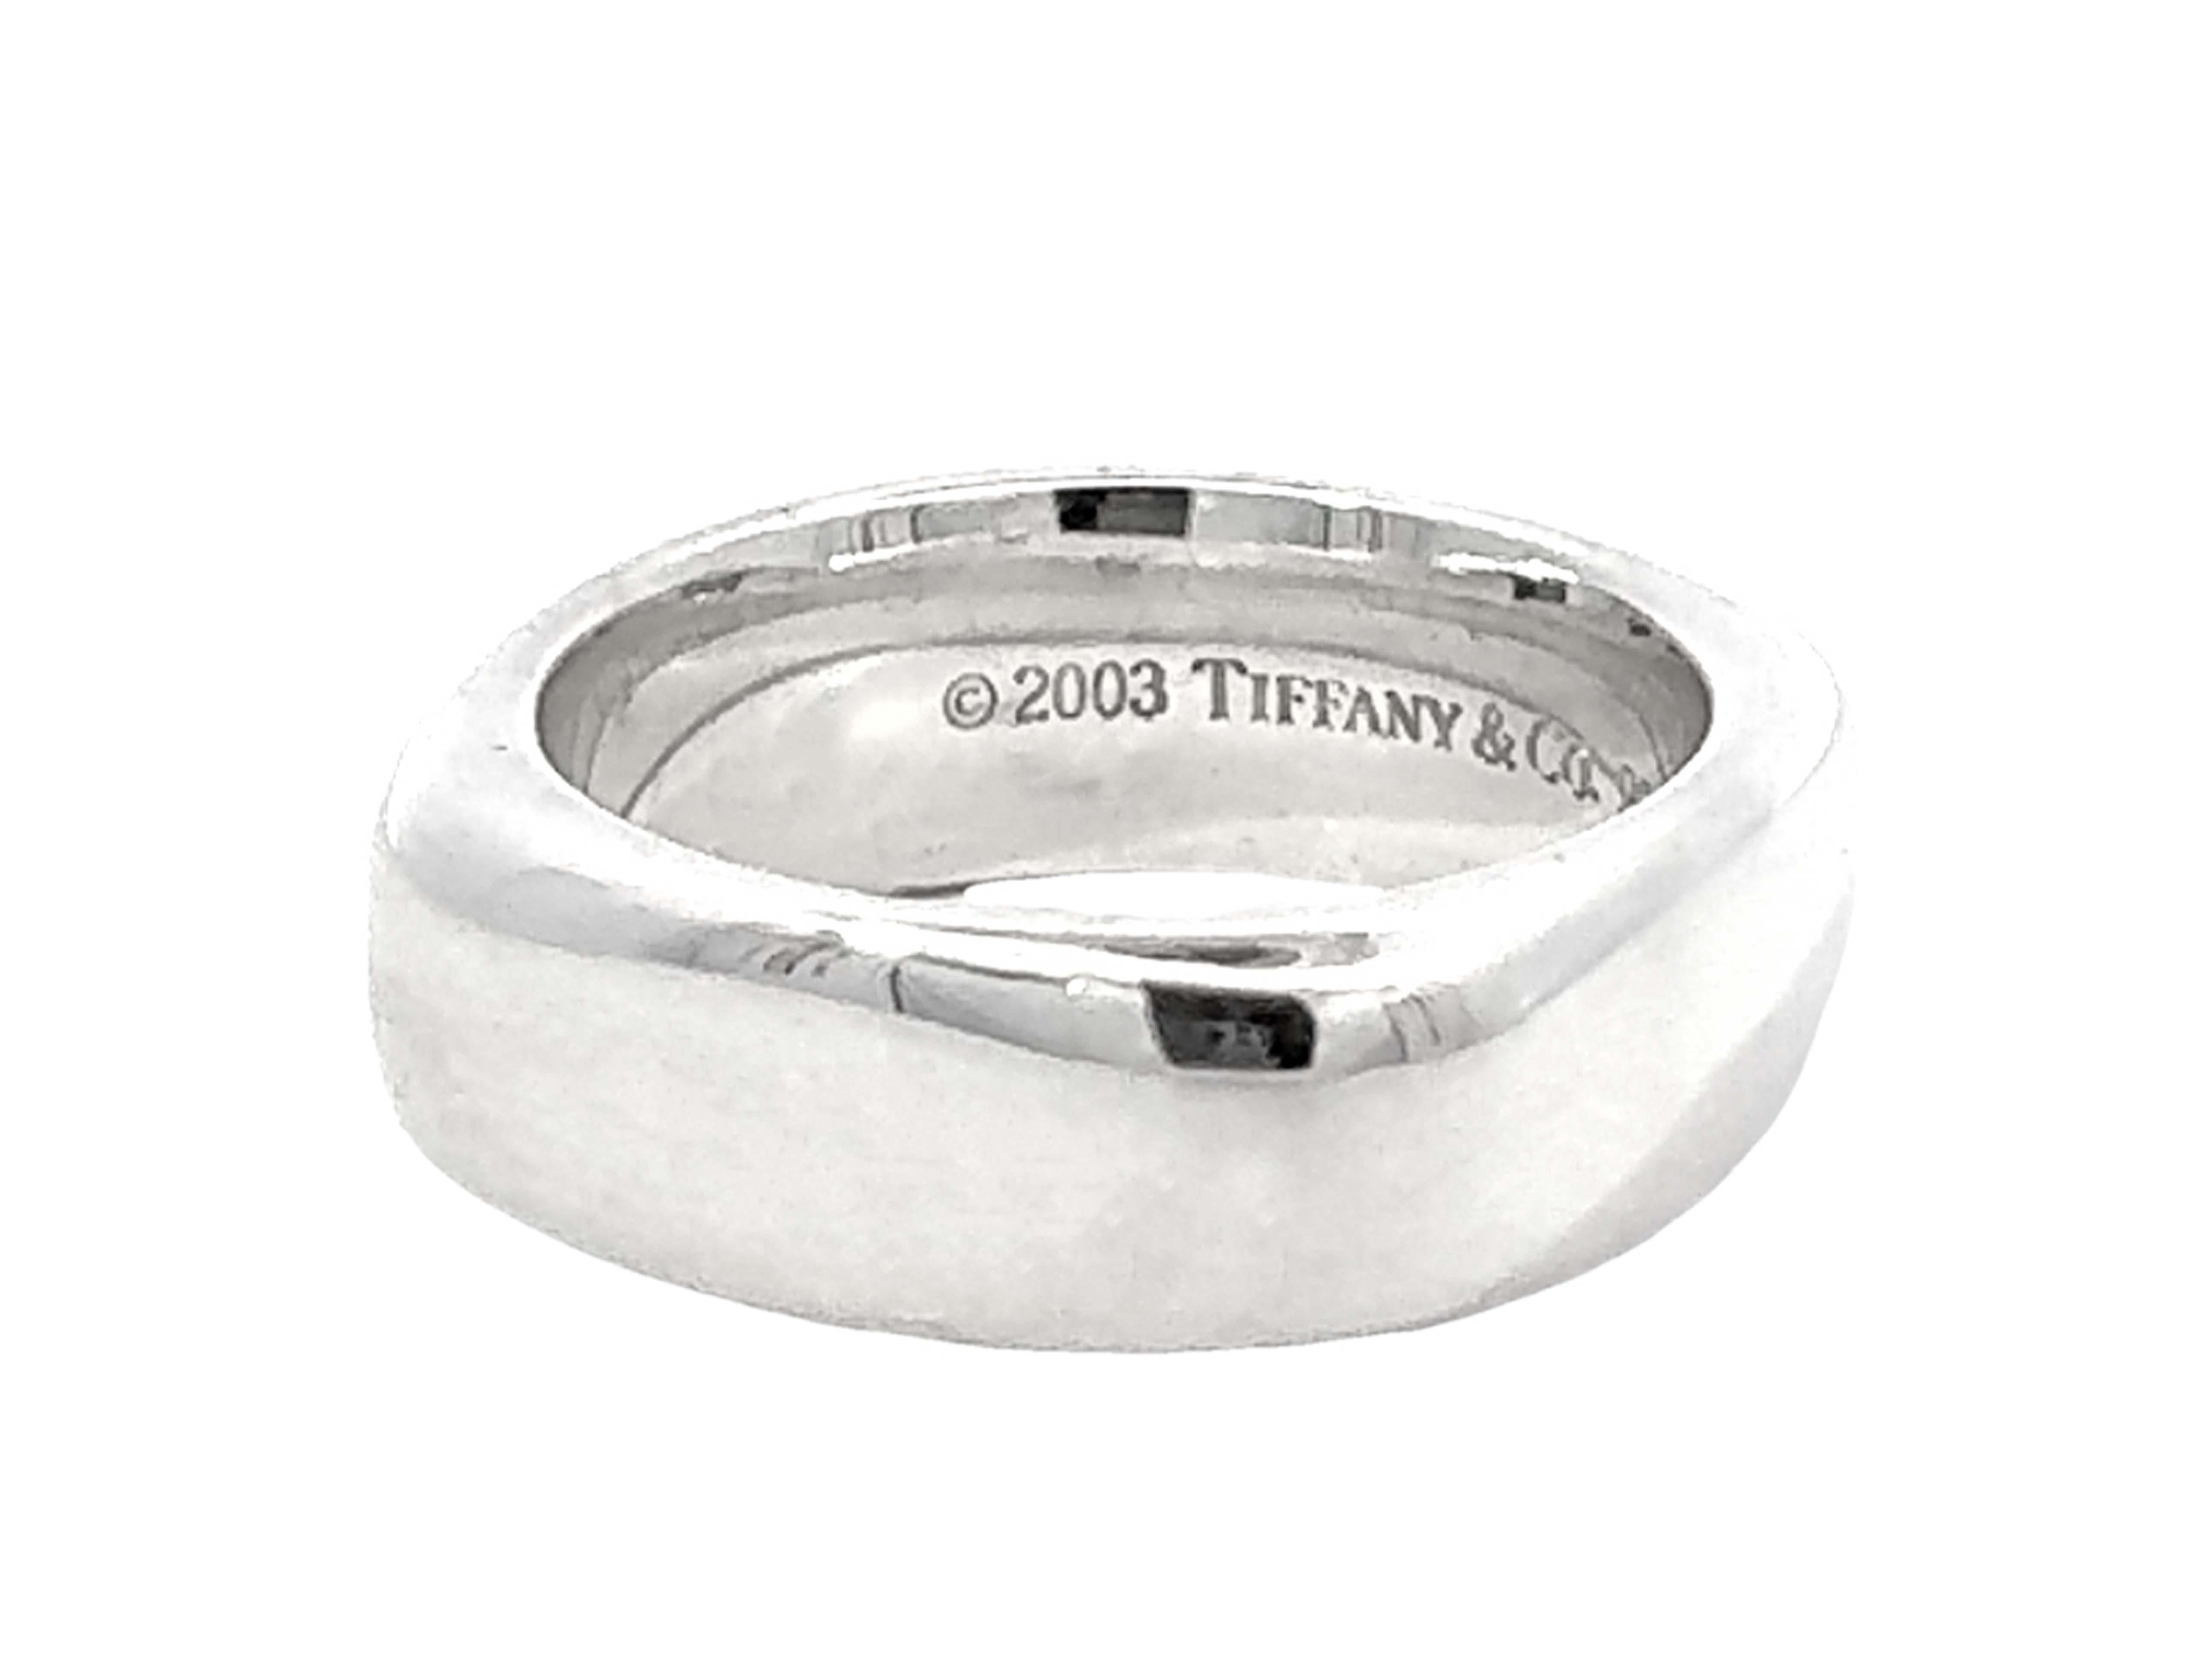 Item Specifications:

Brand: Tiffany & Co.

Metal: Sterling Silver

Metal Purity: AG 925 

RingWidth: 8.2 mm wide

Ring Thickness: 2.4 mm thick

Total Weight: 15.7 Grams

Size: 10.5

Condition: Vintage, Excellent

Stamped: 